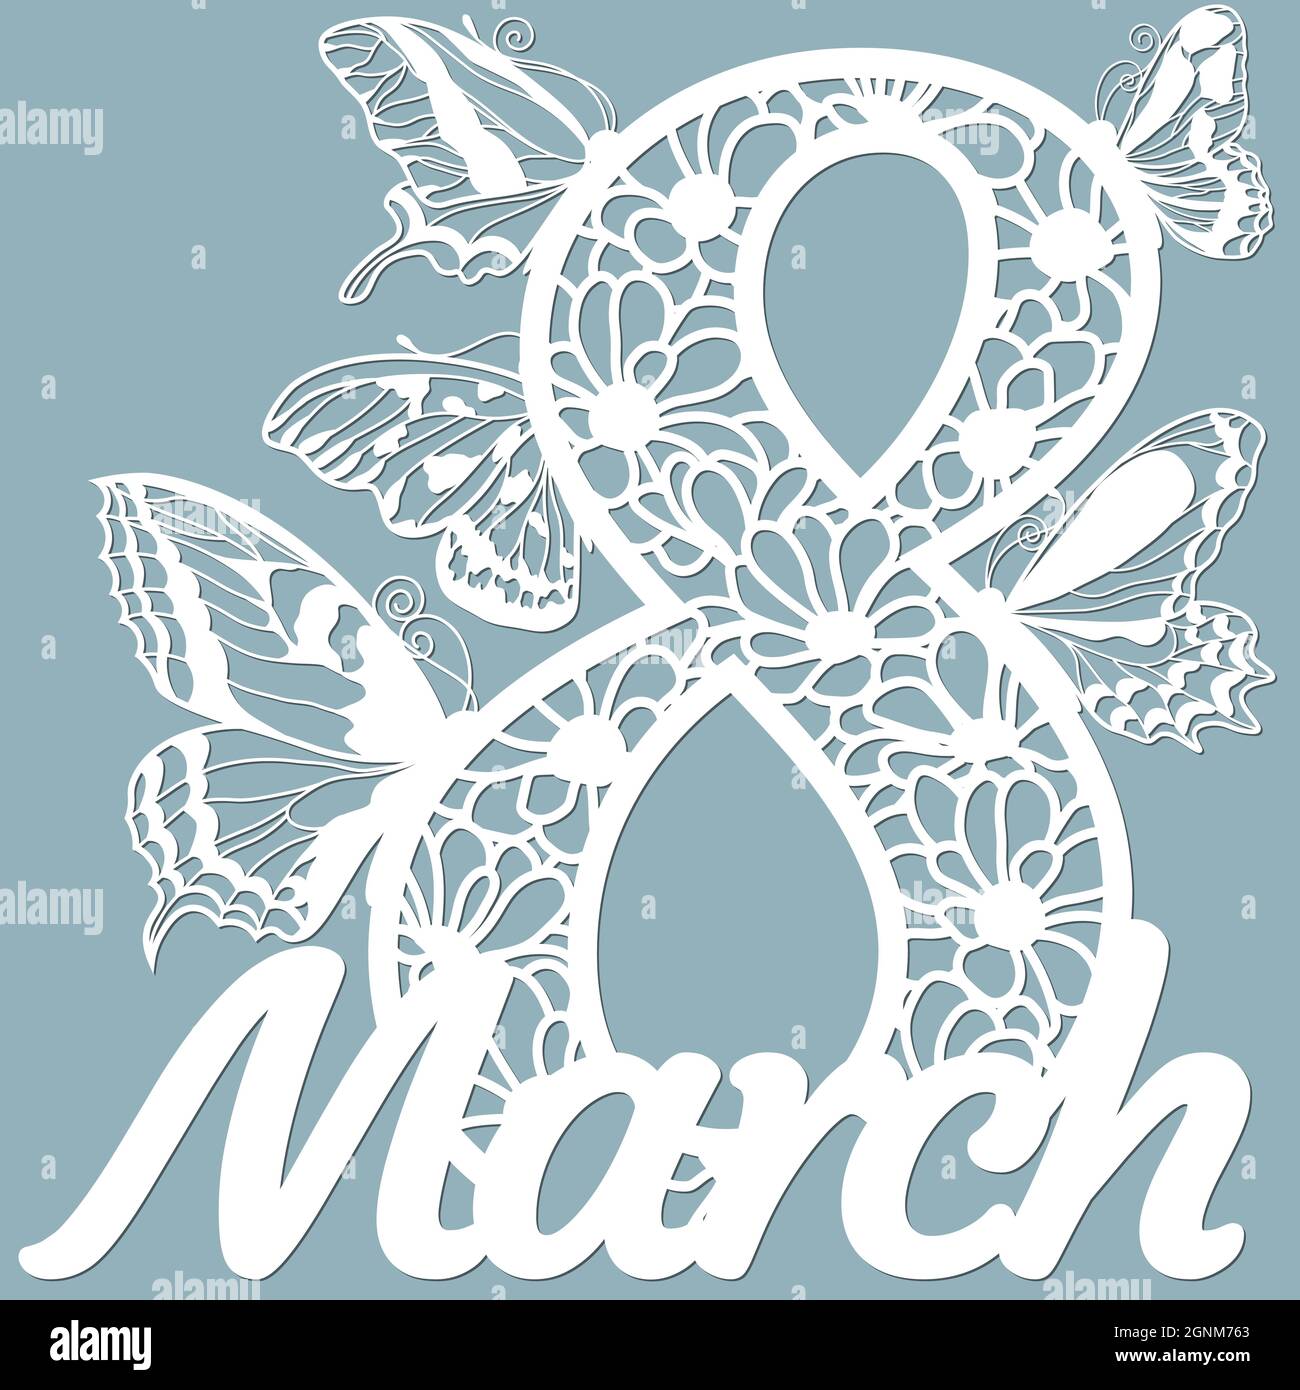 Decoration for women's day - 8 March. Template for laser cutting, wood carving, paper cut and printing. Butterfly wings. Flowers Vector illustration. Stock Vector